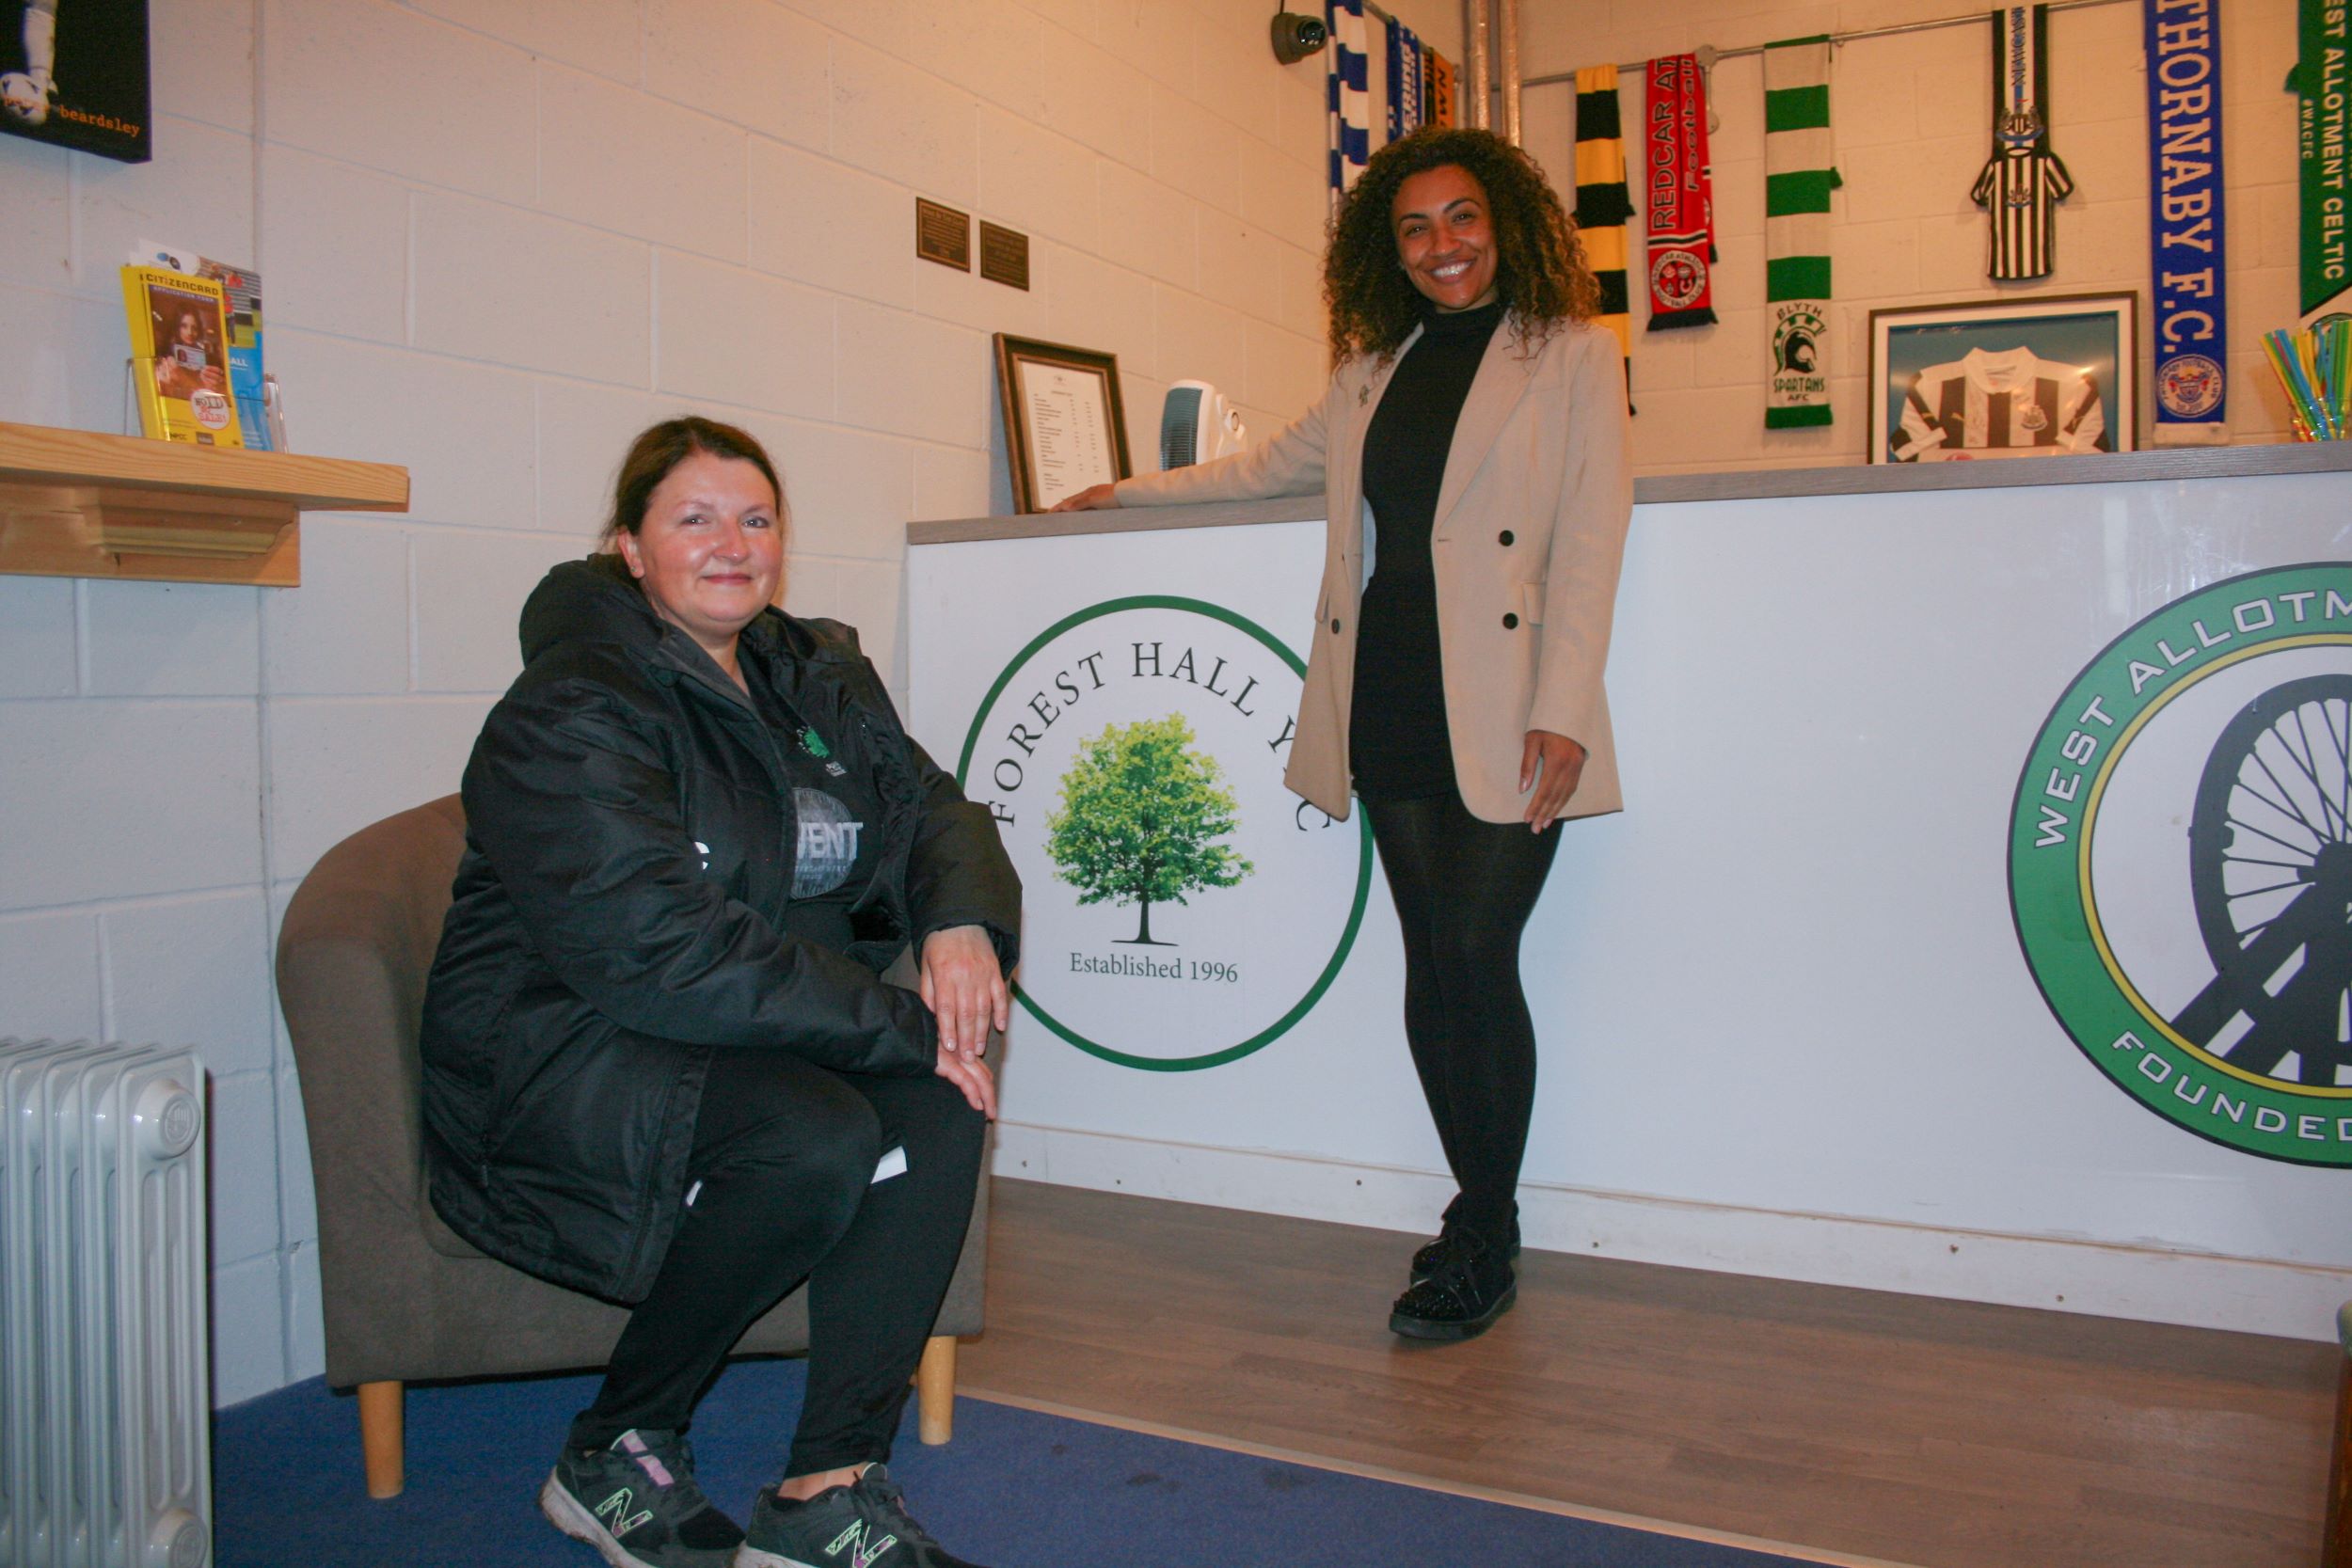 Samantha Corbett of Forest Hall Young Peoples Club with Jamilah Hassan of the Banks Group